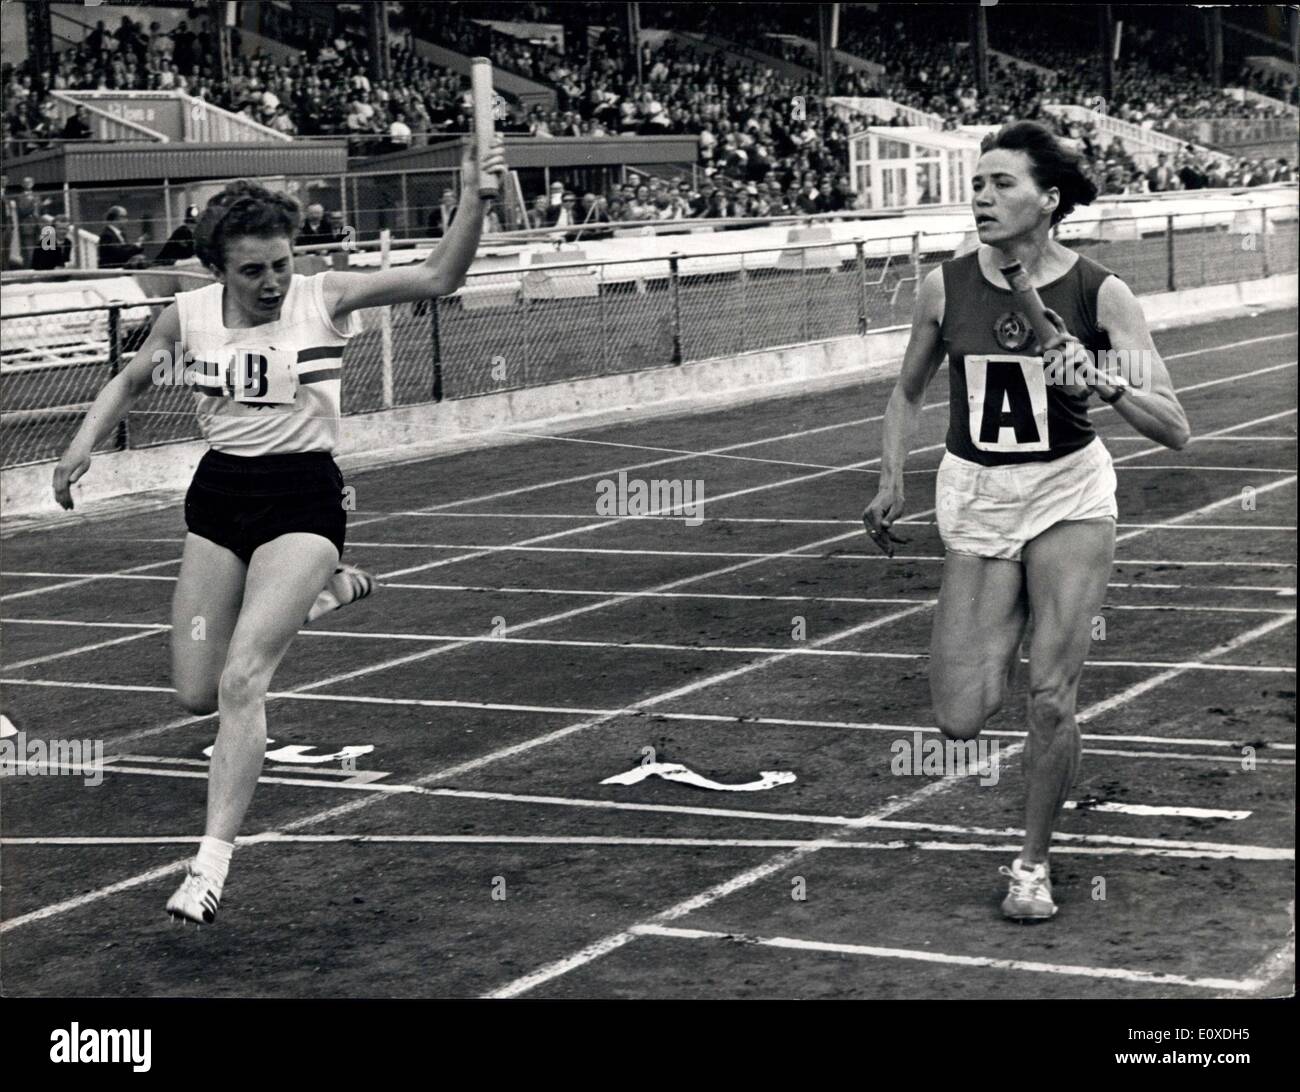 Jun. 18, 1966 - Britain wins 4 x 100 metres relay (Women): London: Britain's Jill Hall (Mitcham Athletic Club) ''B'' is pictured winning the 4 x 100 metres relay (Women) in 45.6 seconds from Russia's Vyera Popkova (A) during the second and final day of the Great Britain and Northern Ireland Versus Russia International Athletics match organised by the British Amateur Athletic Board at the White City Stadium today, June 18. Stock Photo